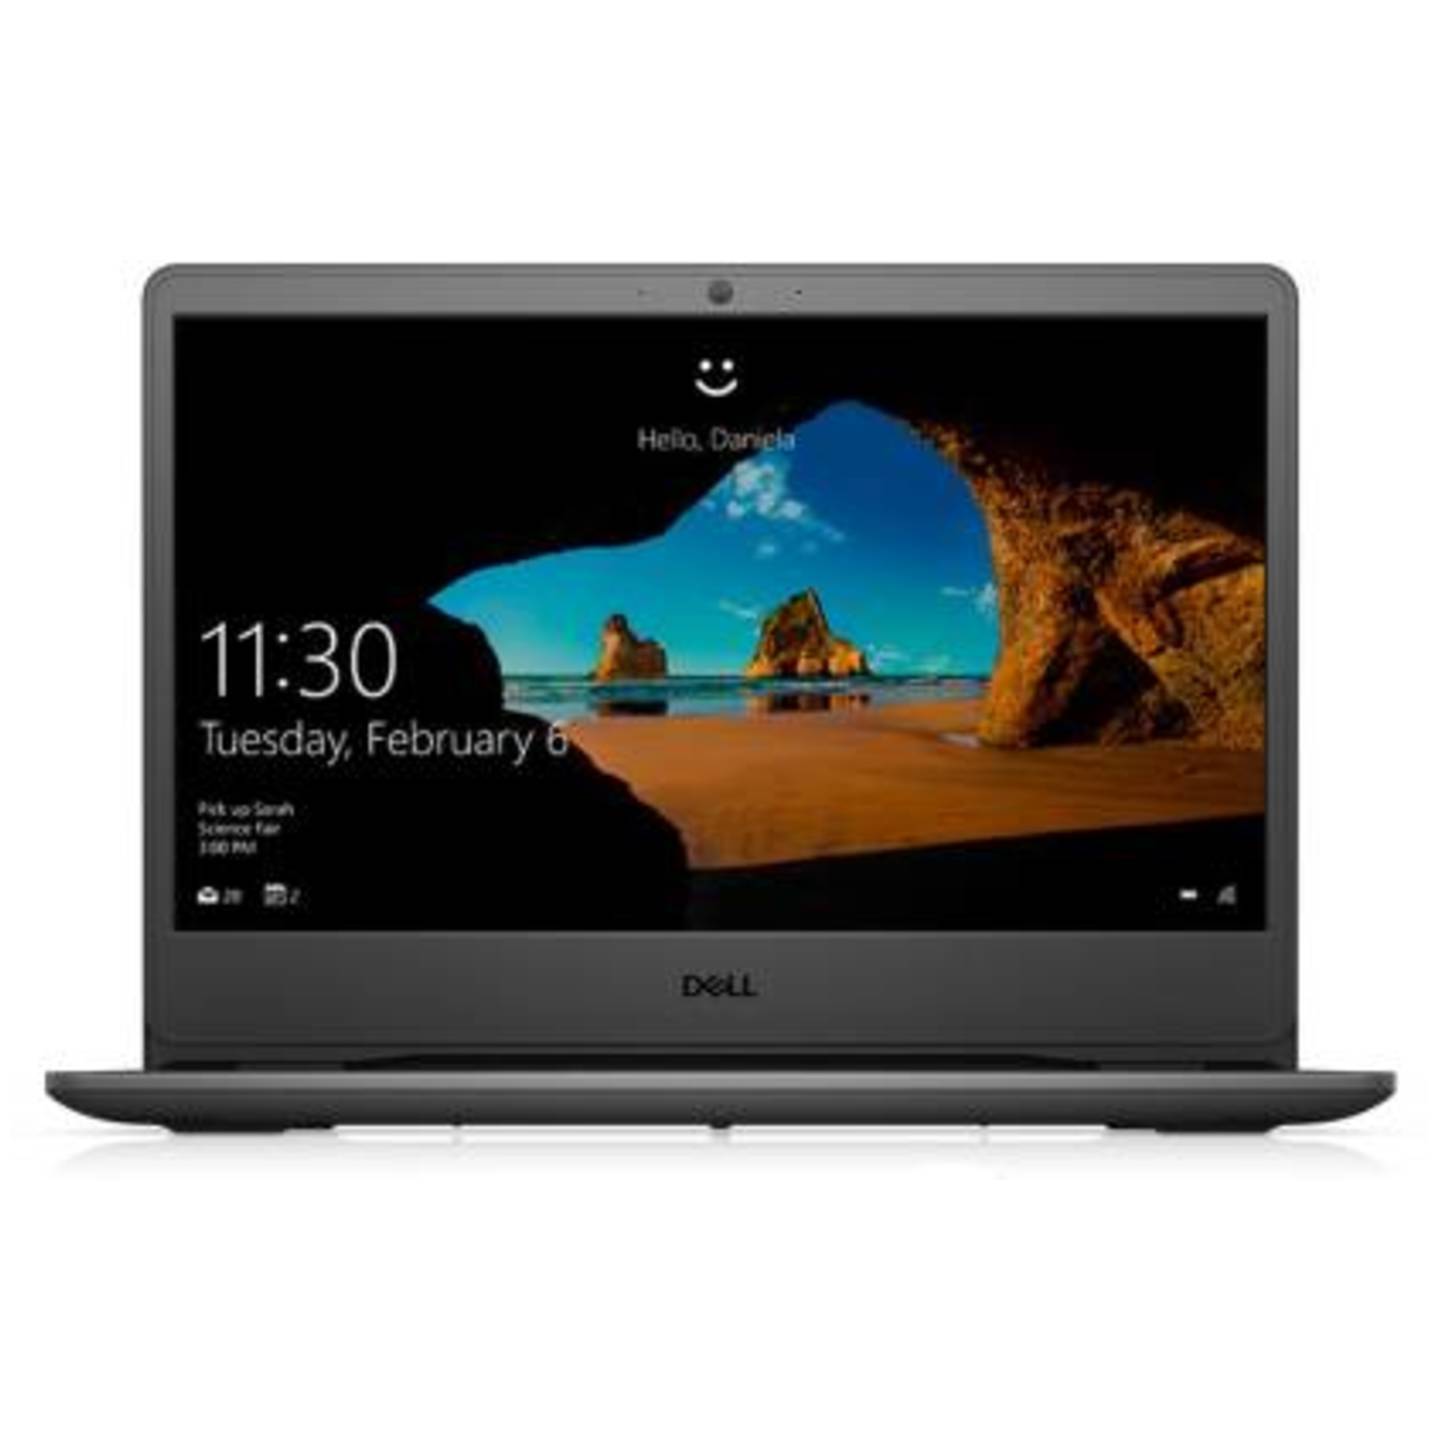 DELL Vostro Core i5 11th Gen - (8 GB/1 TB HDD/Windows 10 Home) Vostro 3400 Thin and Light Laptop  (14 inch, Black, 1.58 kg, With MS Office)